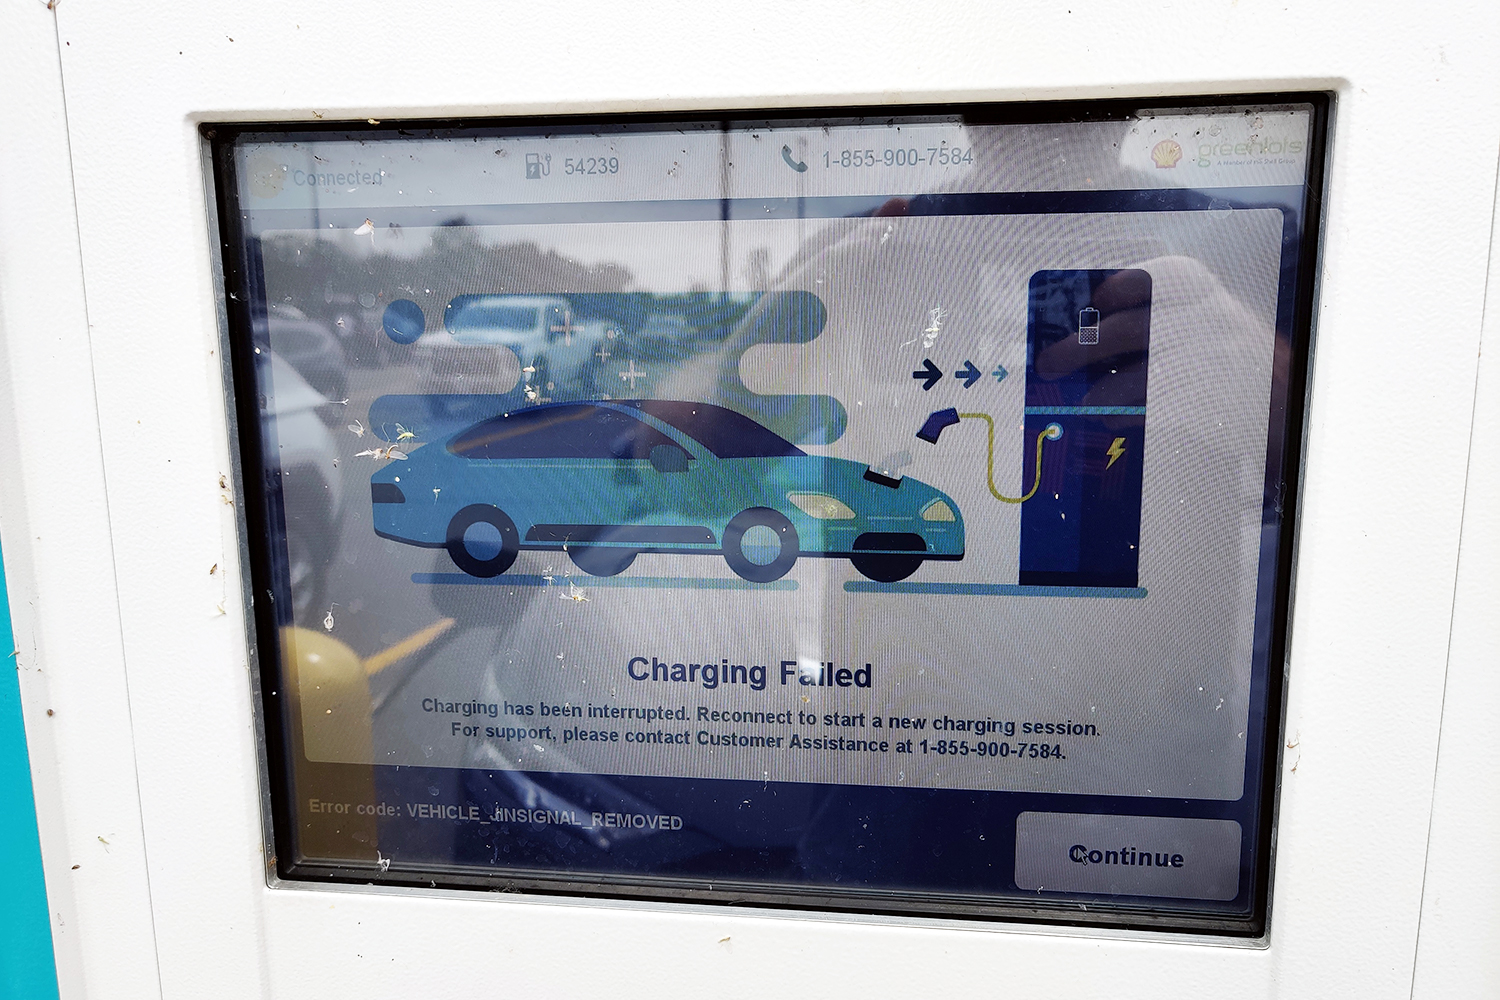 A screen on an Ivy charging station in Canada, the first stop on my electric vehicle road trip, reading "Charging Failed"